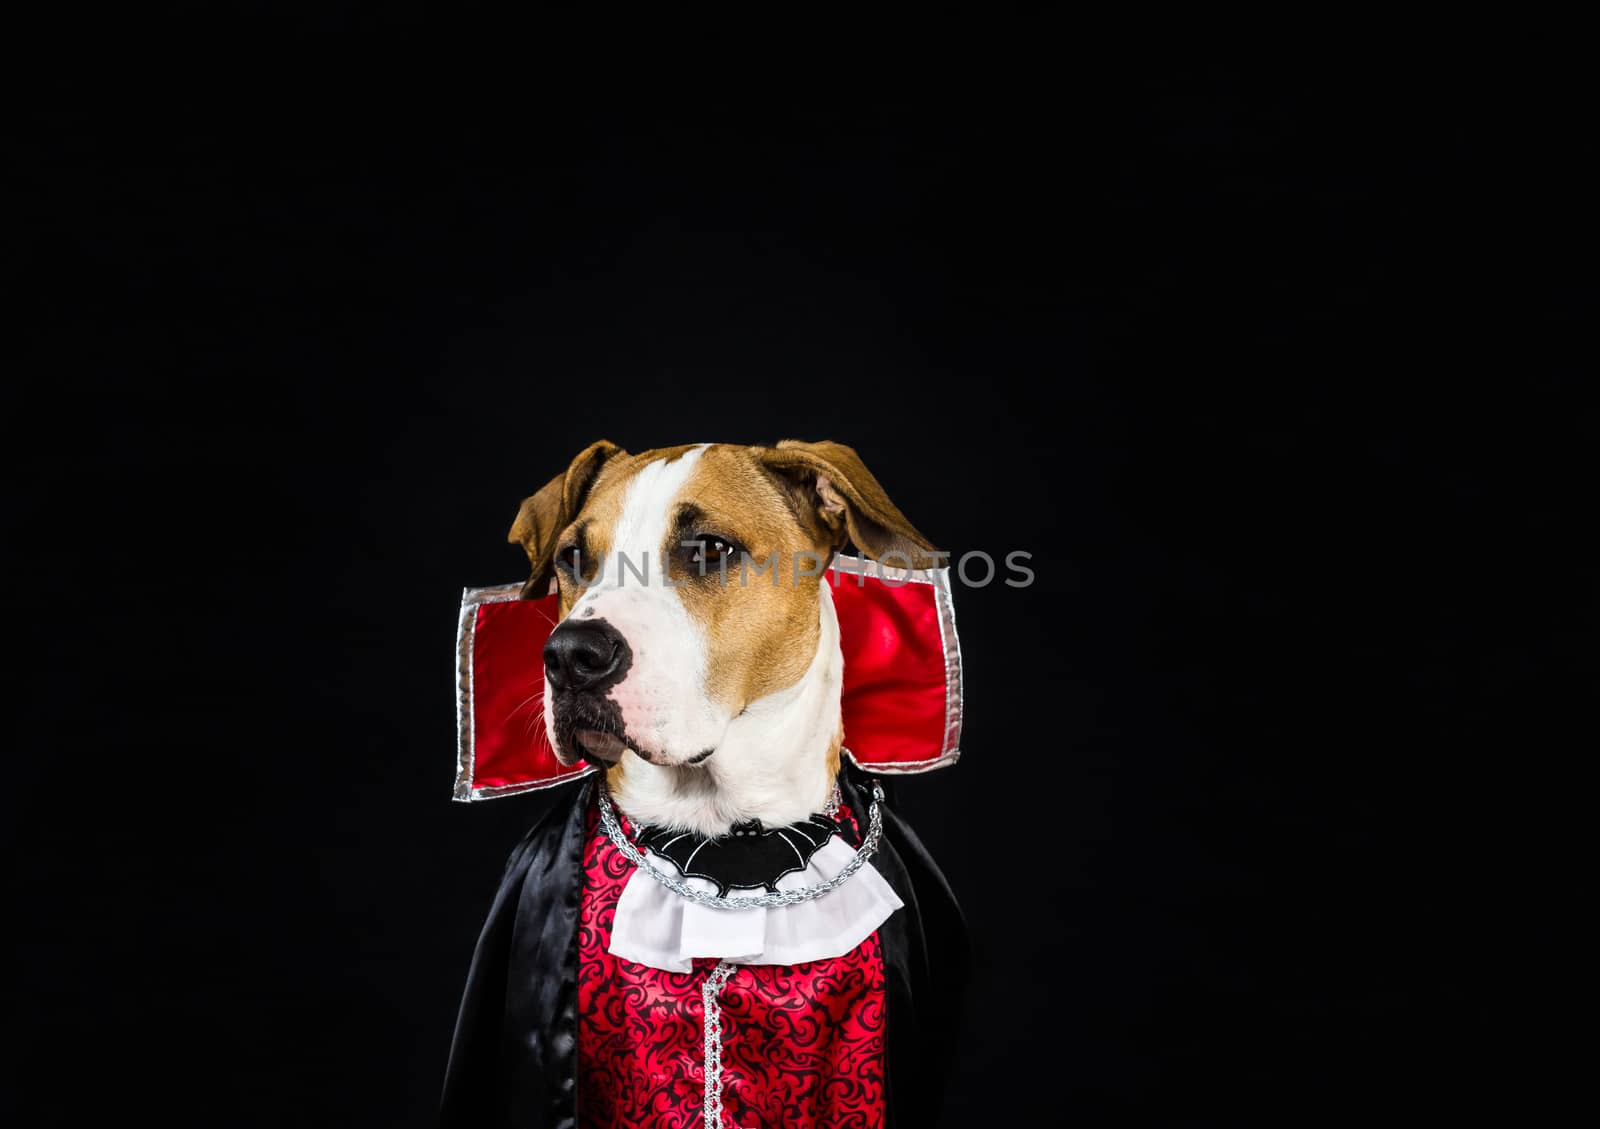 Dog dressed up for halloween in a vampire outfit posing in front of dark background